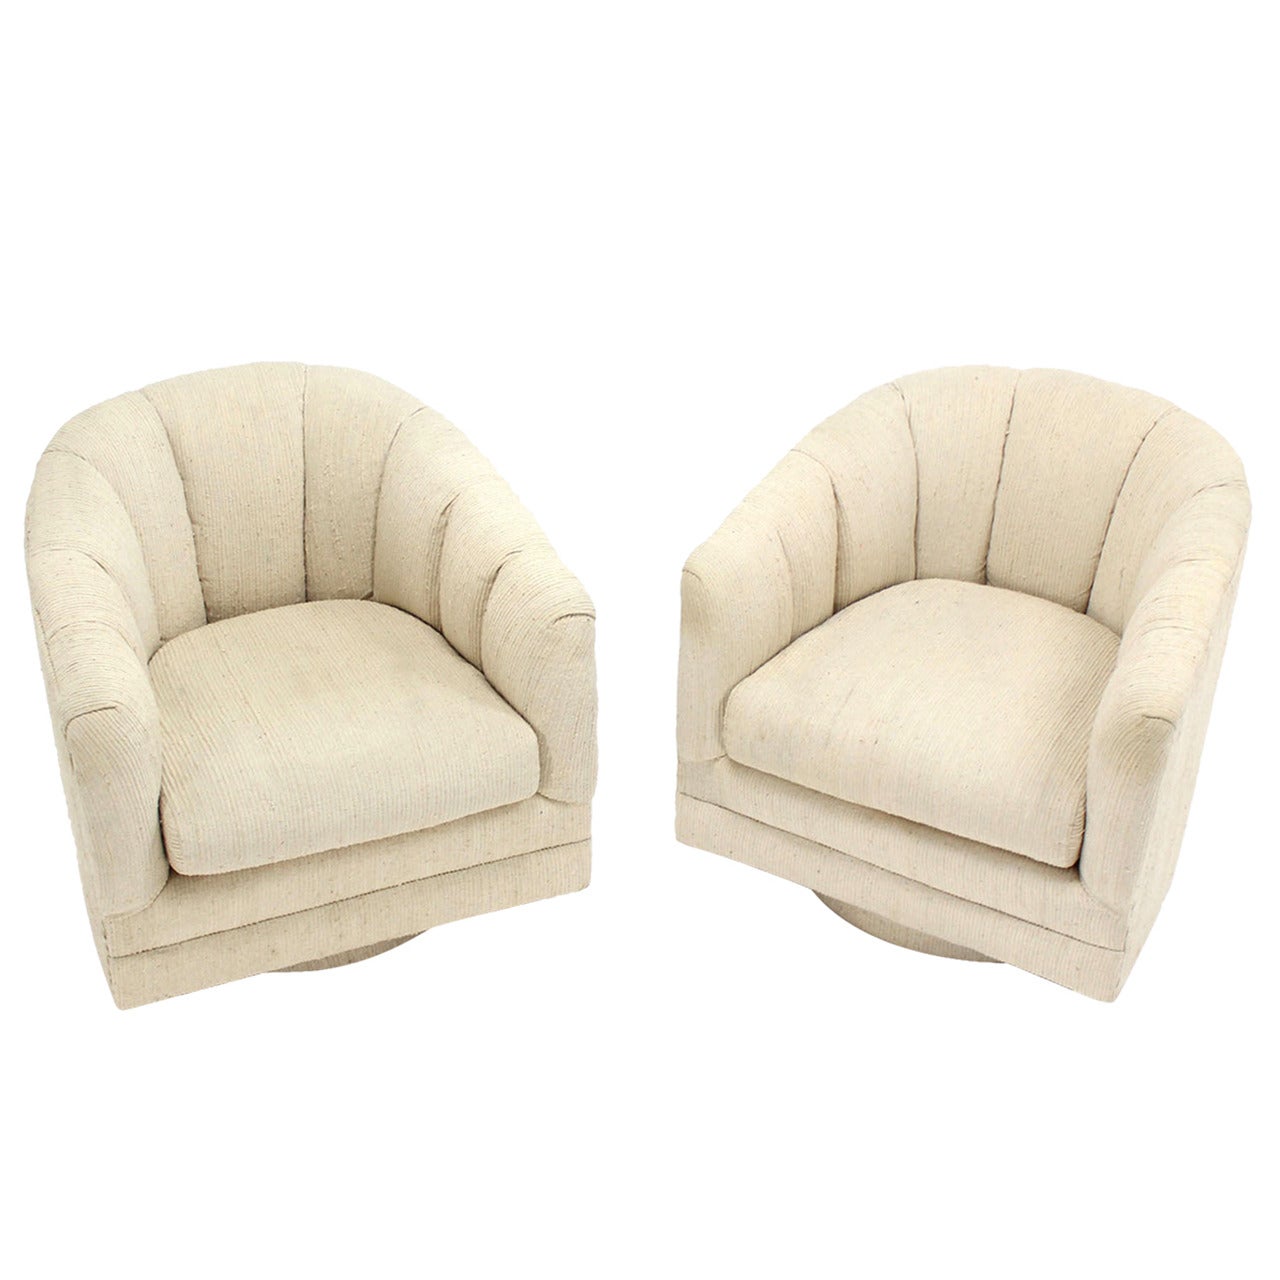 Pair of Revolving Lounge Barrel-Back Chairs by Milo Baughman